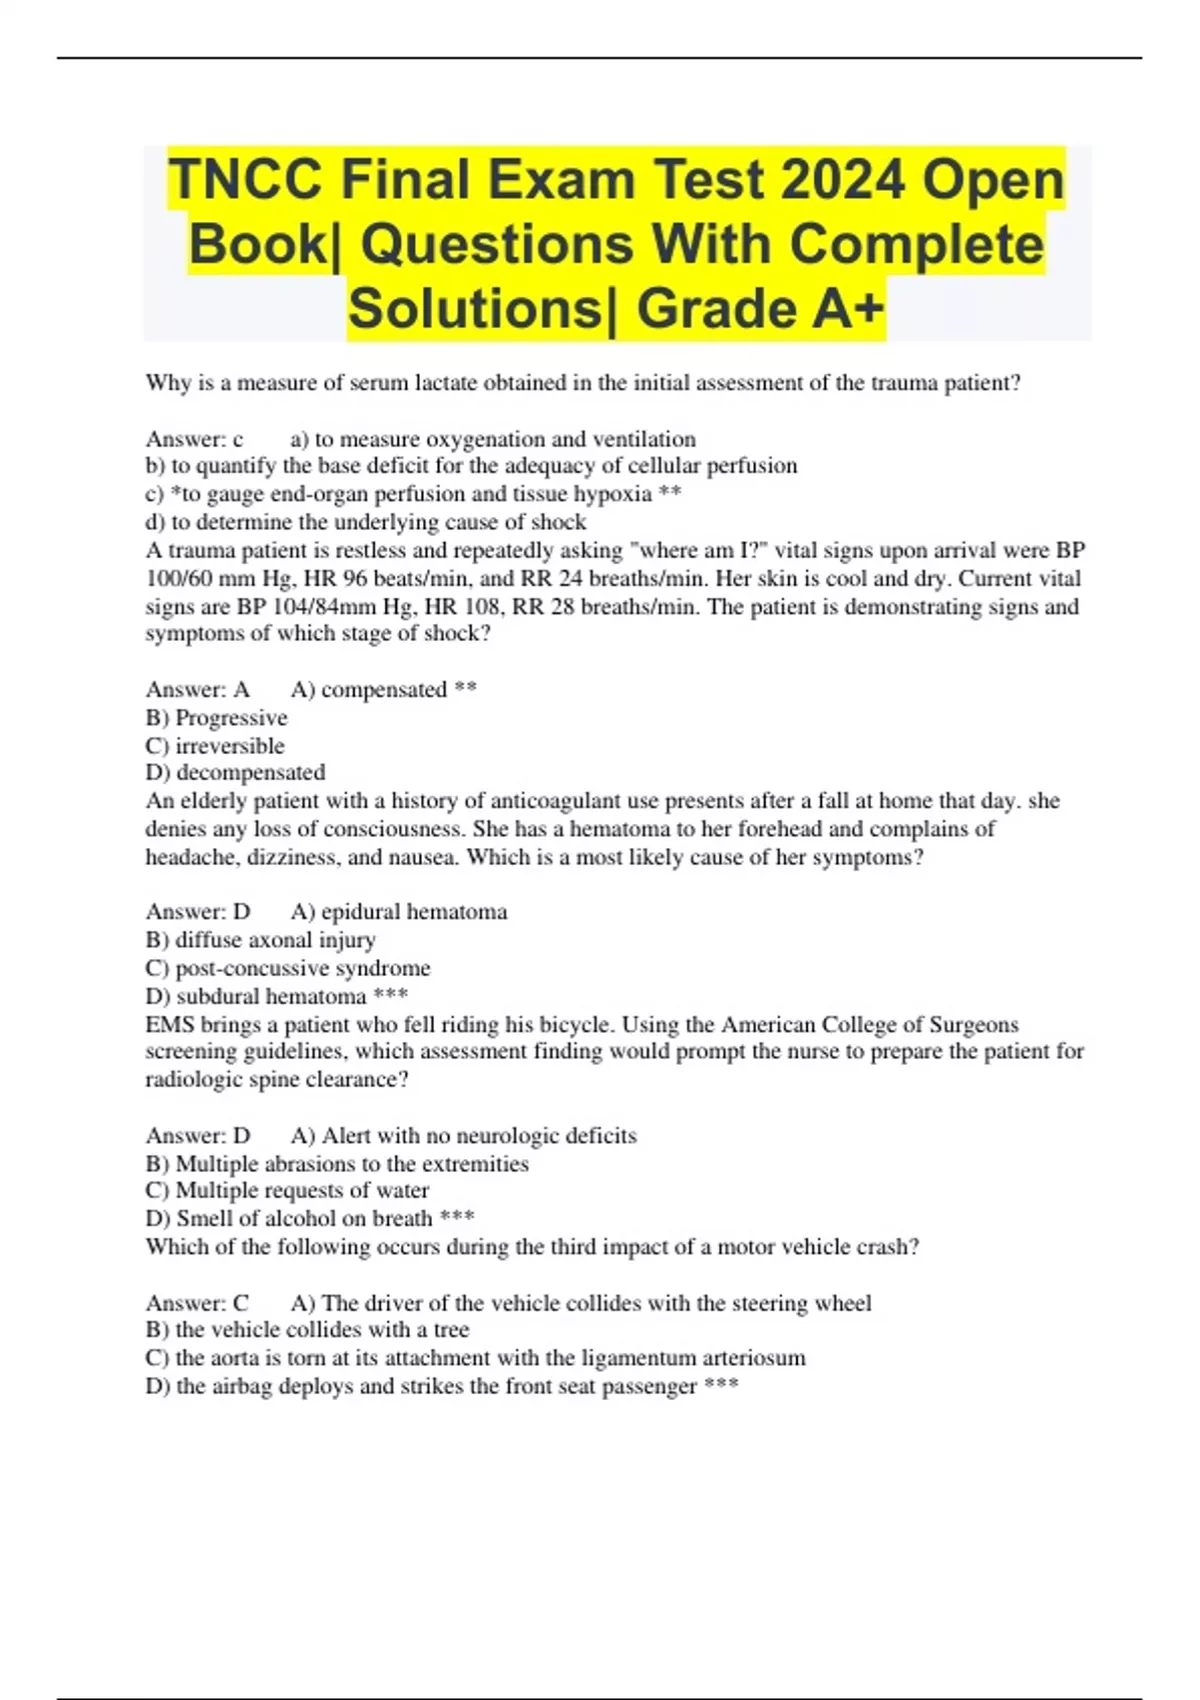 TNCC Final Exam Test 2024 Open Book Questions With Complete Solutions Grade A+ TNCC Stuvia US